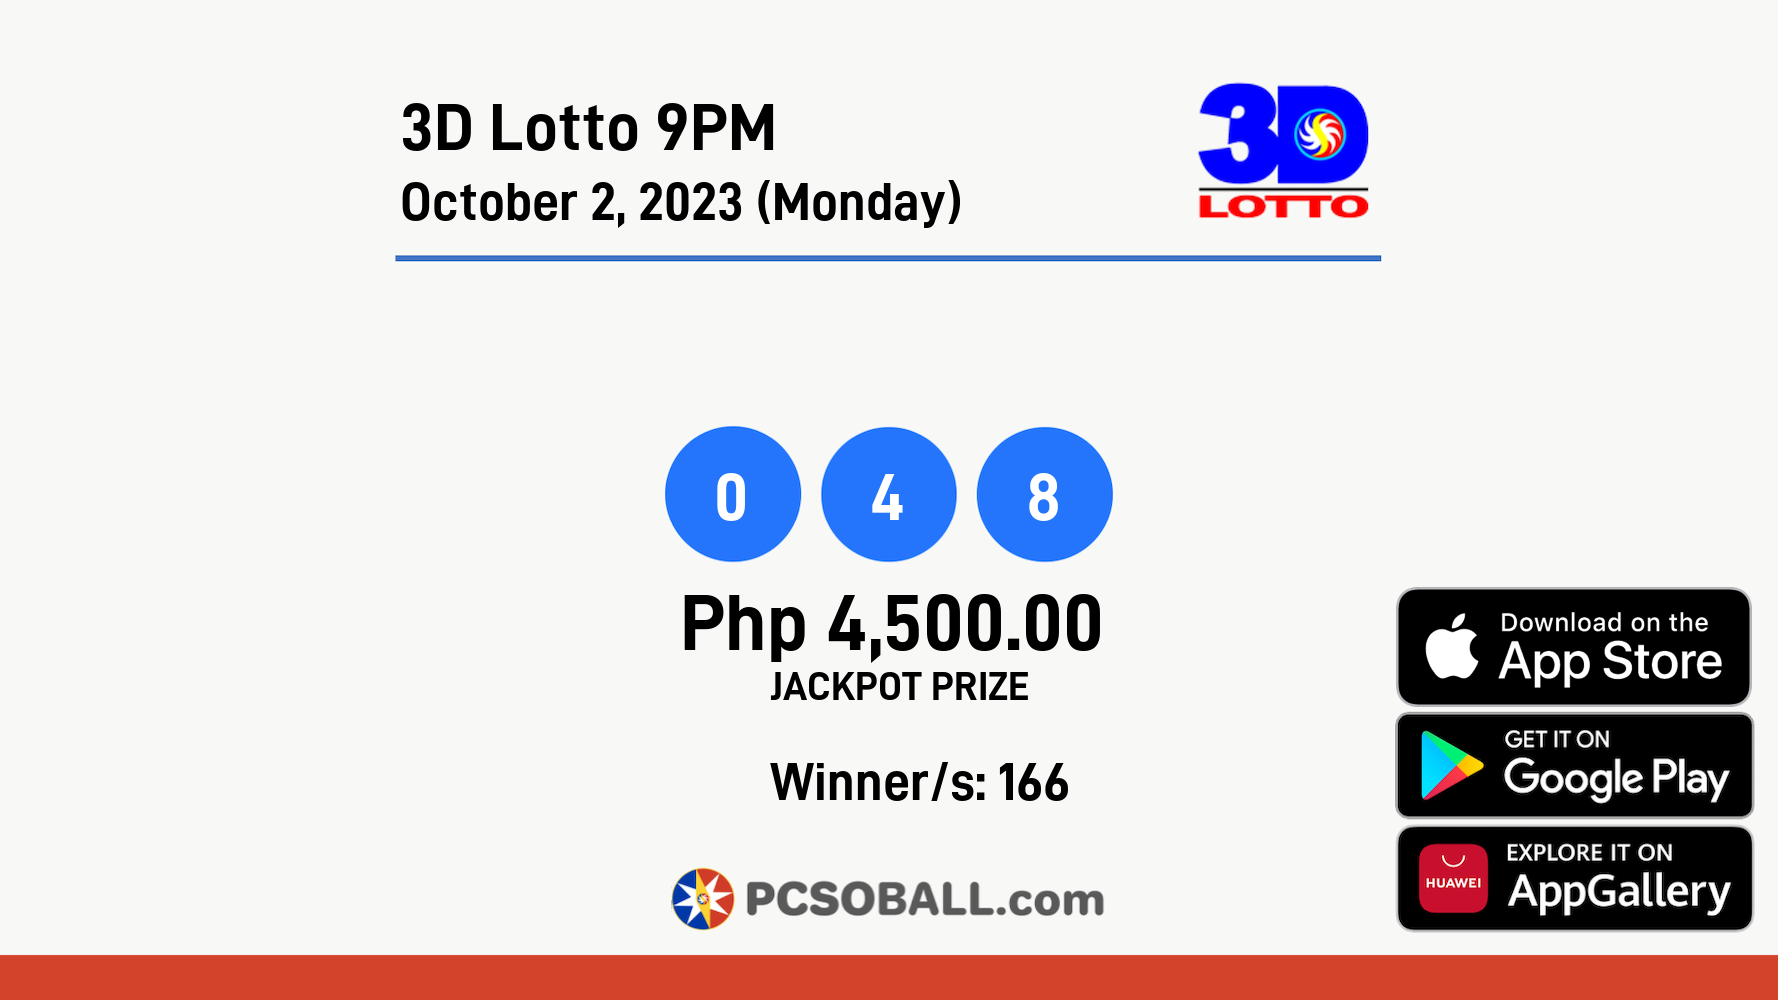 3D Lotto 9PM October 2, 2023 (Monday) Result